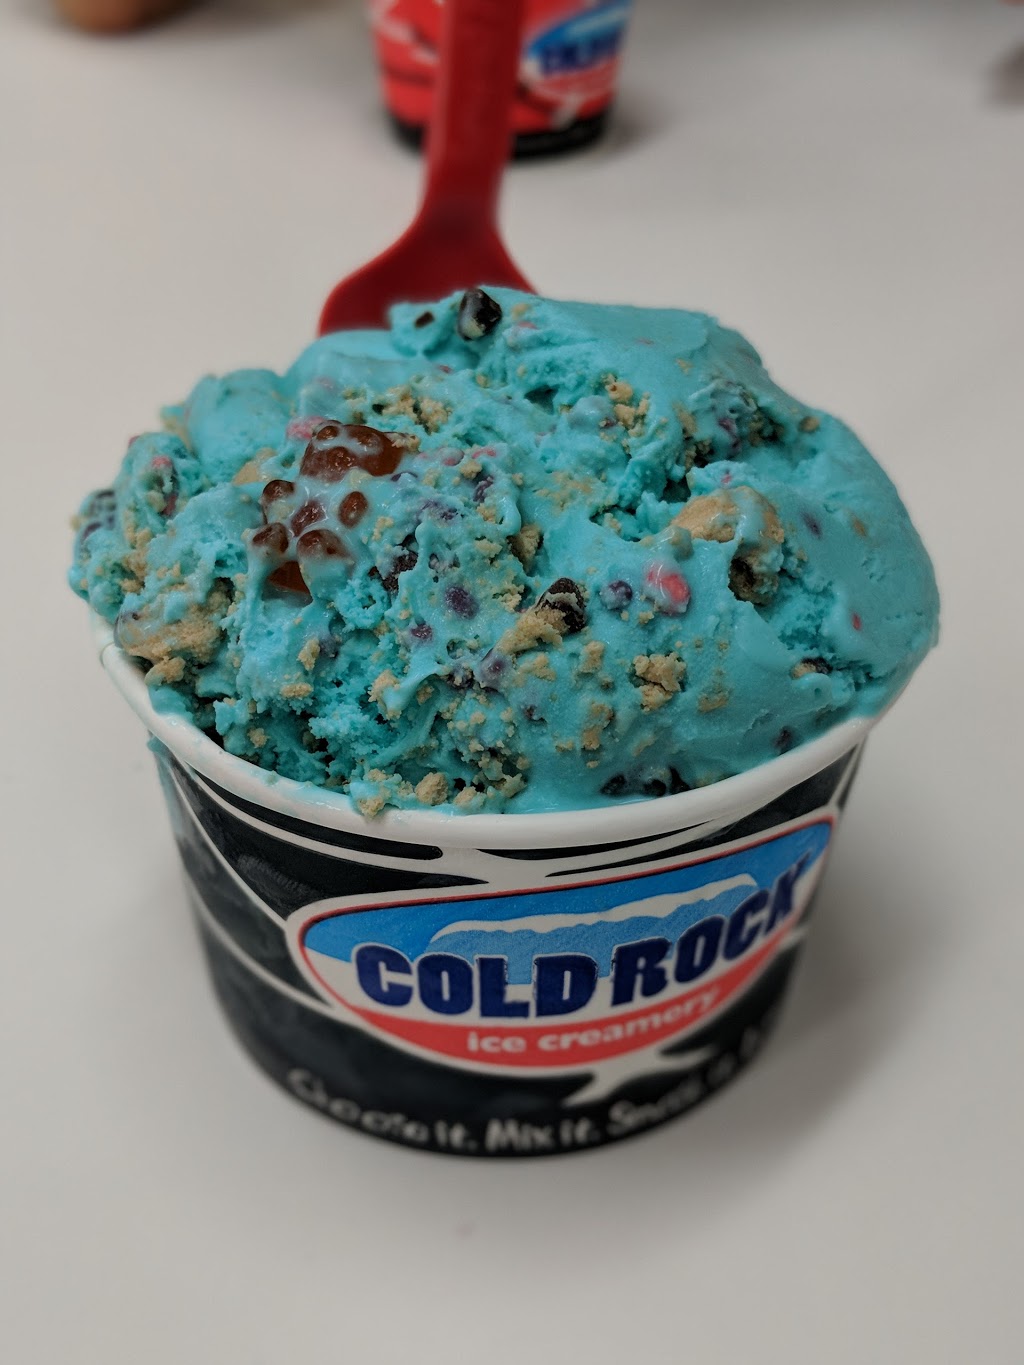 Cold Rock ice creamery | store | 794 A-796 Ruthven St &, Alderley St, South Toowoomba QLD 4350, Australia | 0746134666 OR +61 7 4613 4666